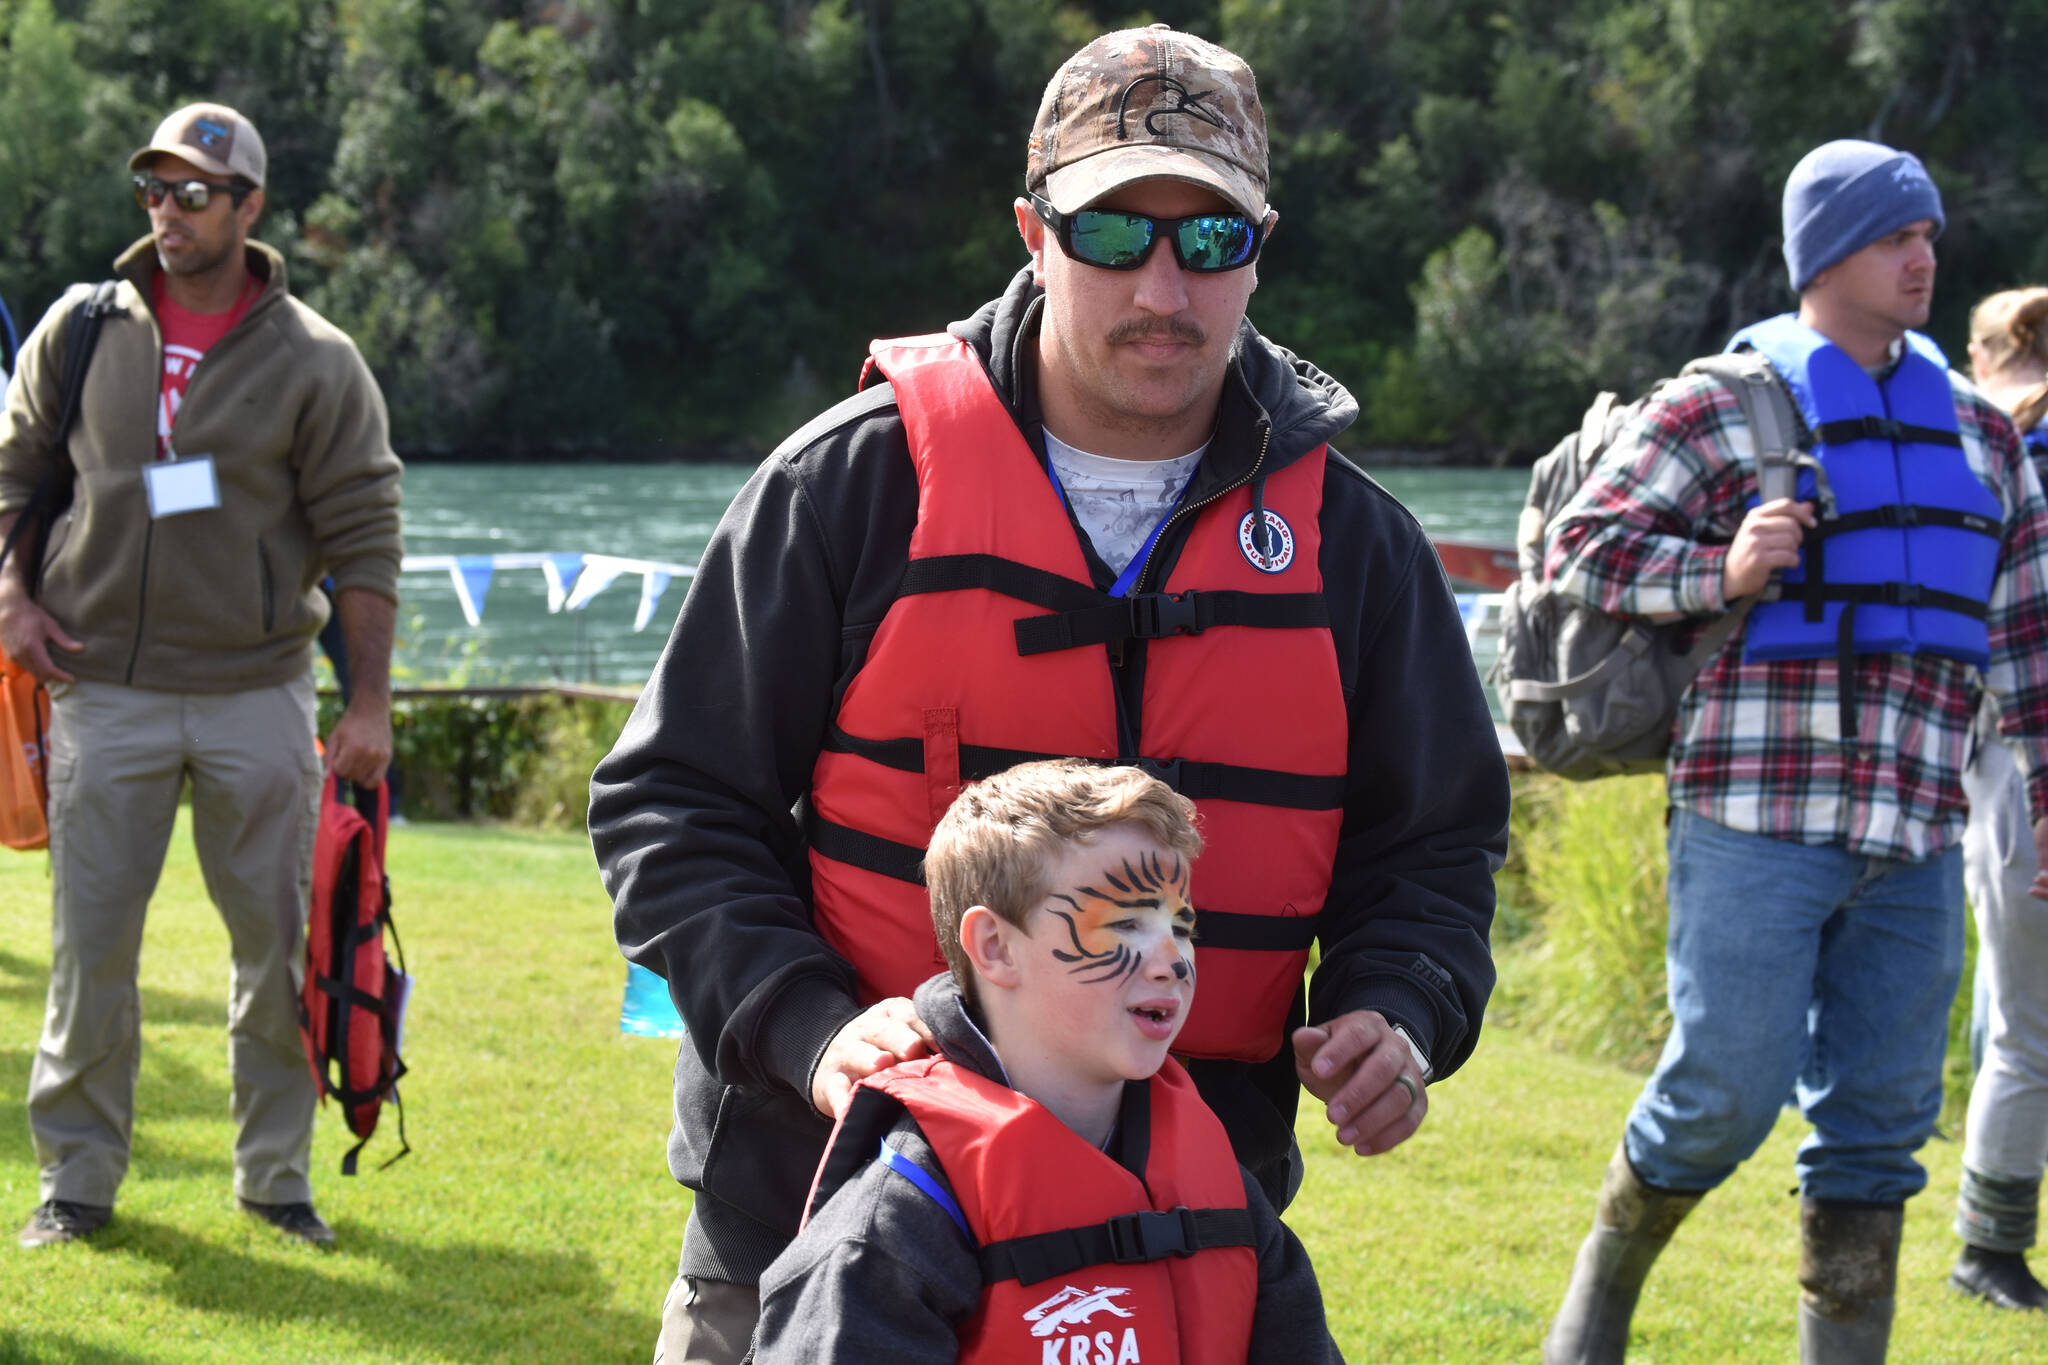 A boy and chaperone fitted with life jackets and waiting to go fishing at the Kenai River Junior Classic in Soldotna, Alaska, on Aug. 10, 2022. (Jake Dye/Peninsula Clarion)